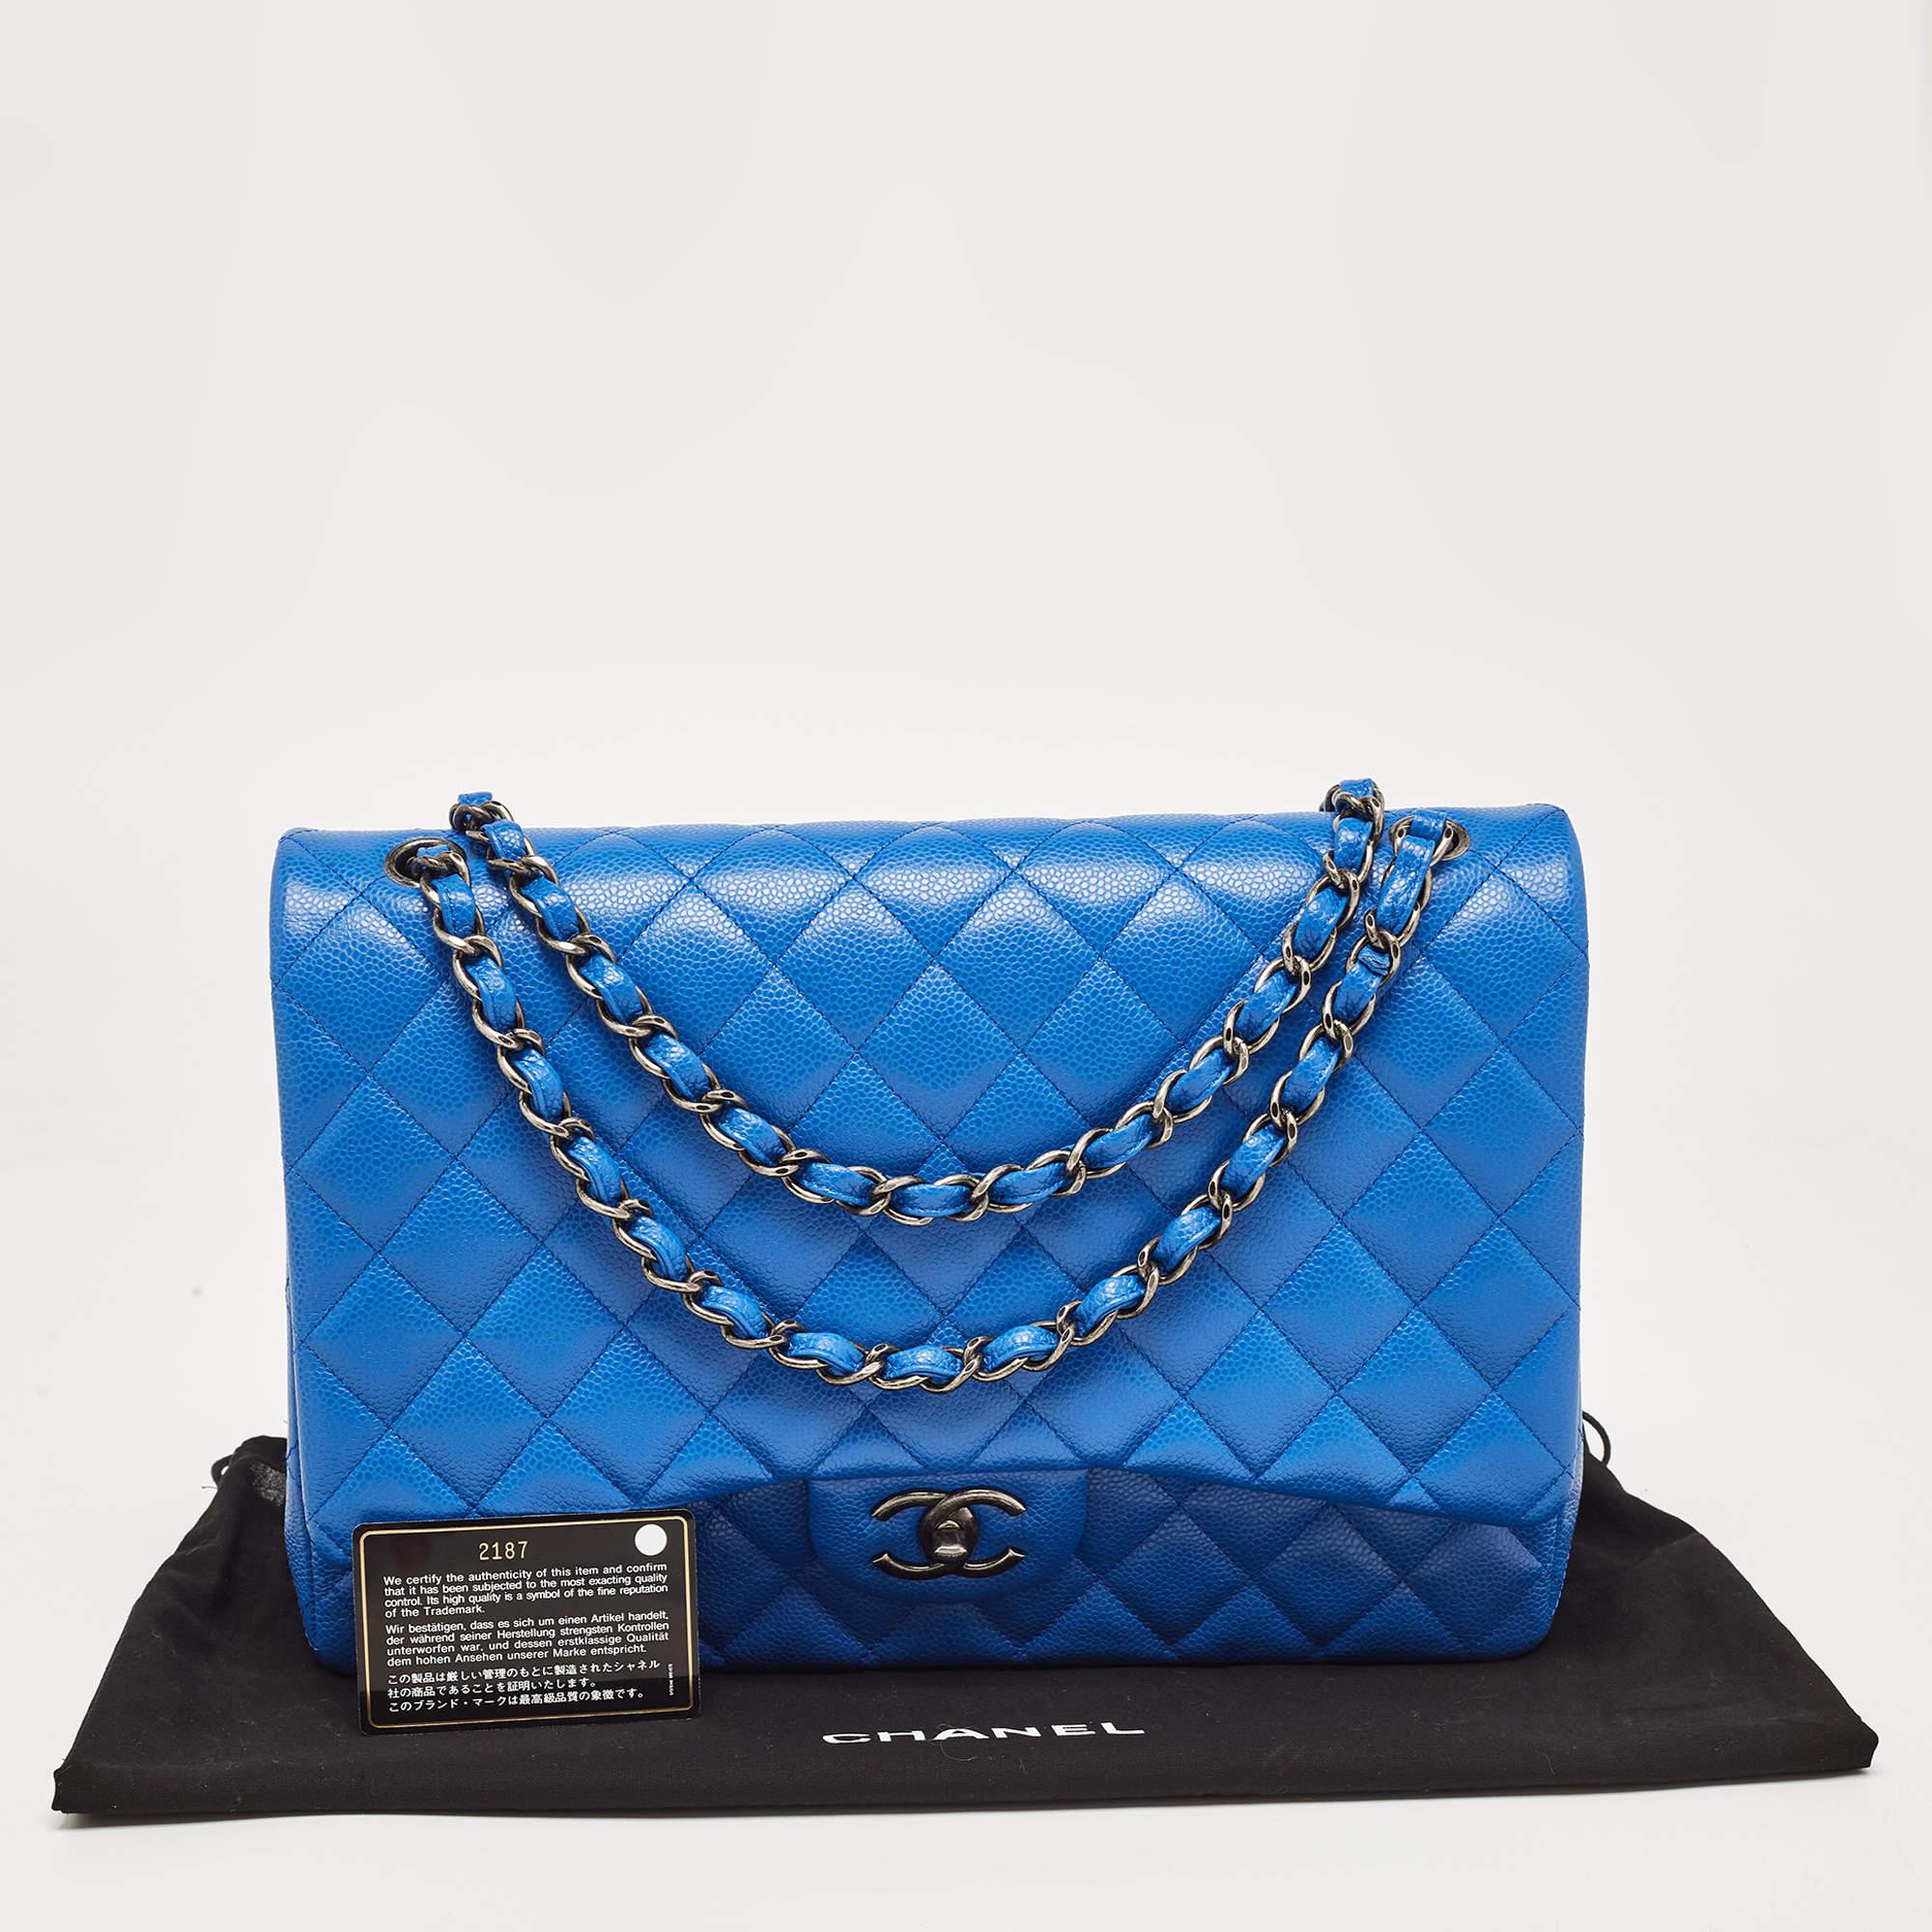 Chanel Blue Quilted Caviar Leather Maxi Classic Double Flap Bag 10